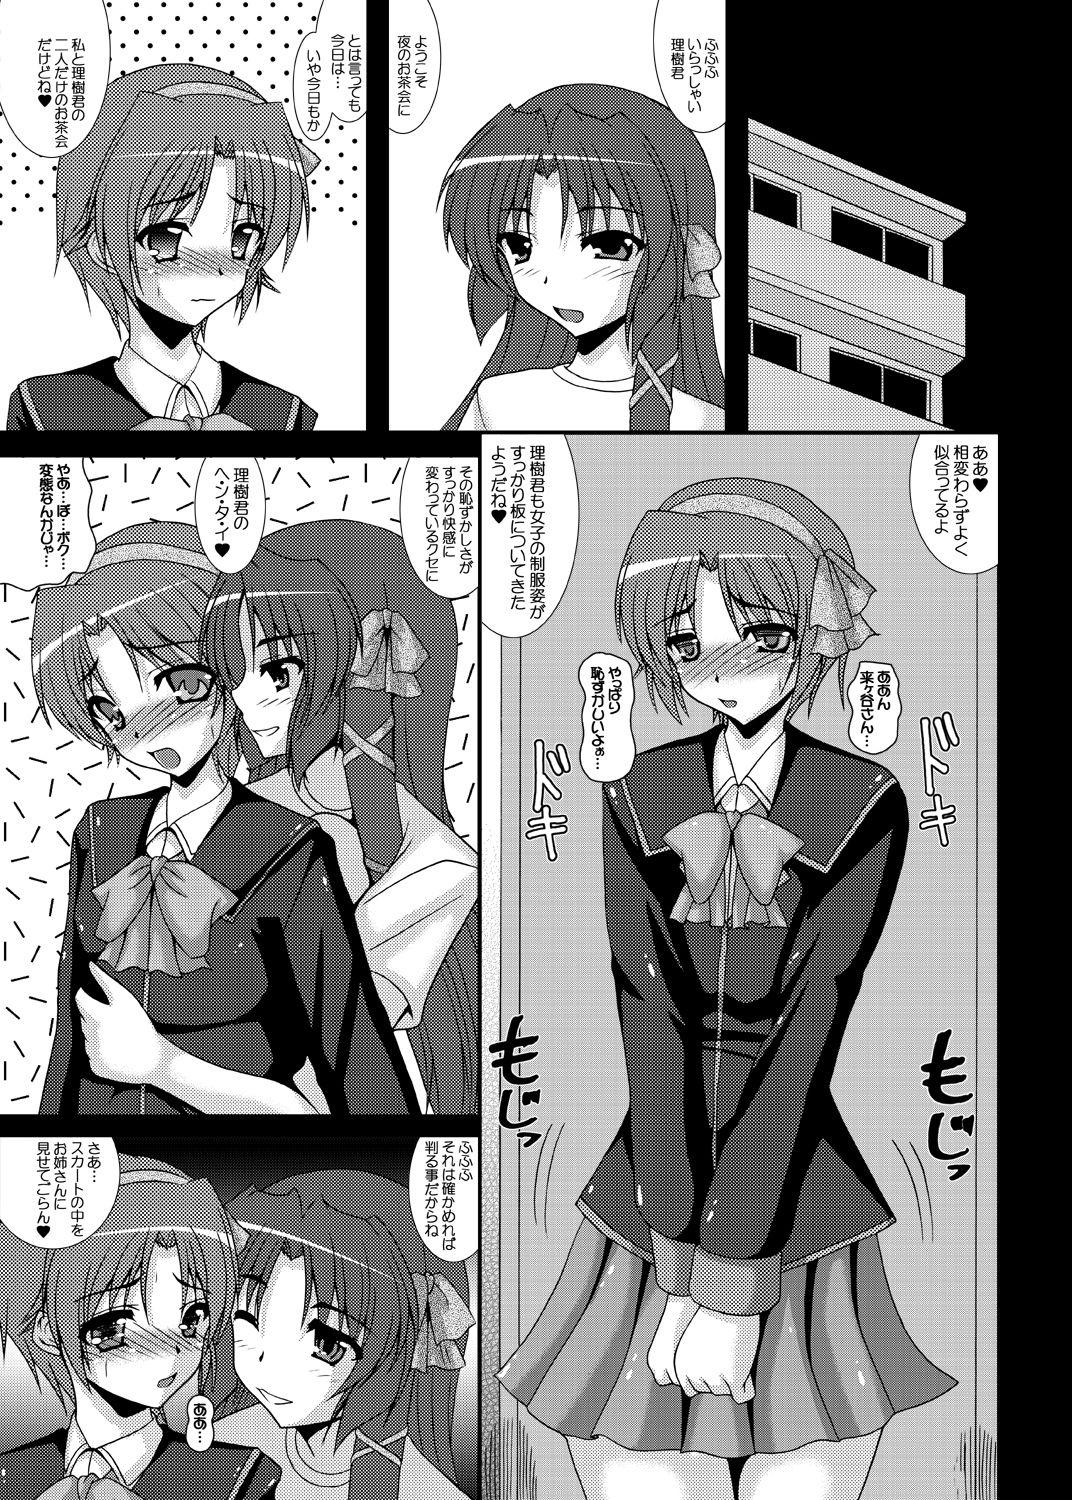 Sexy Girl 理樹君で遊ぼうっ! - Little busters Asian Babes - Page 2